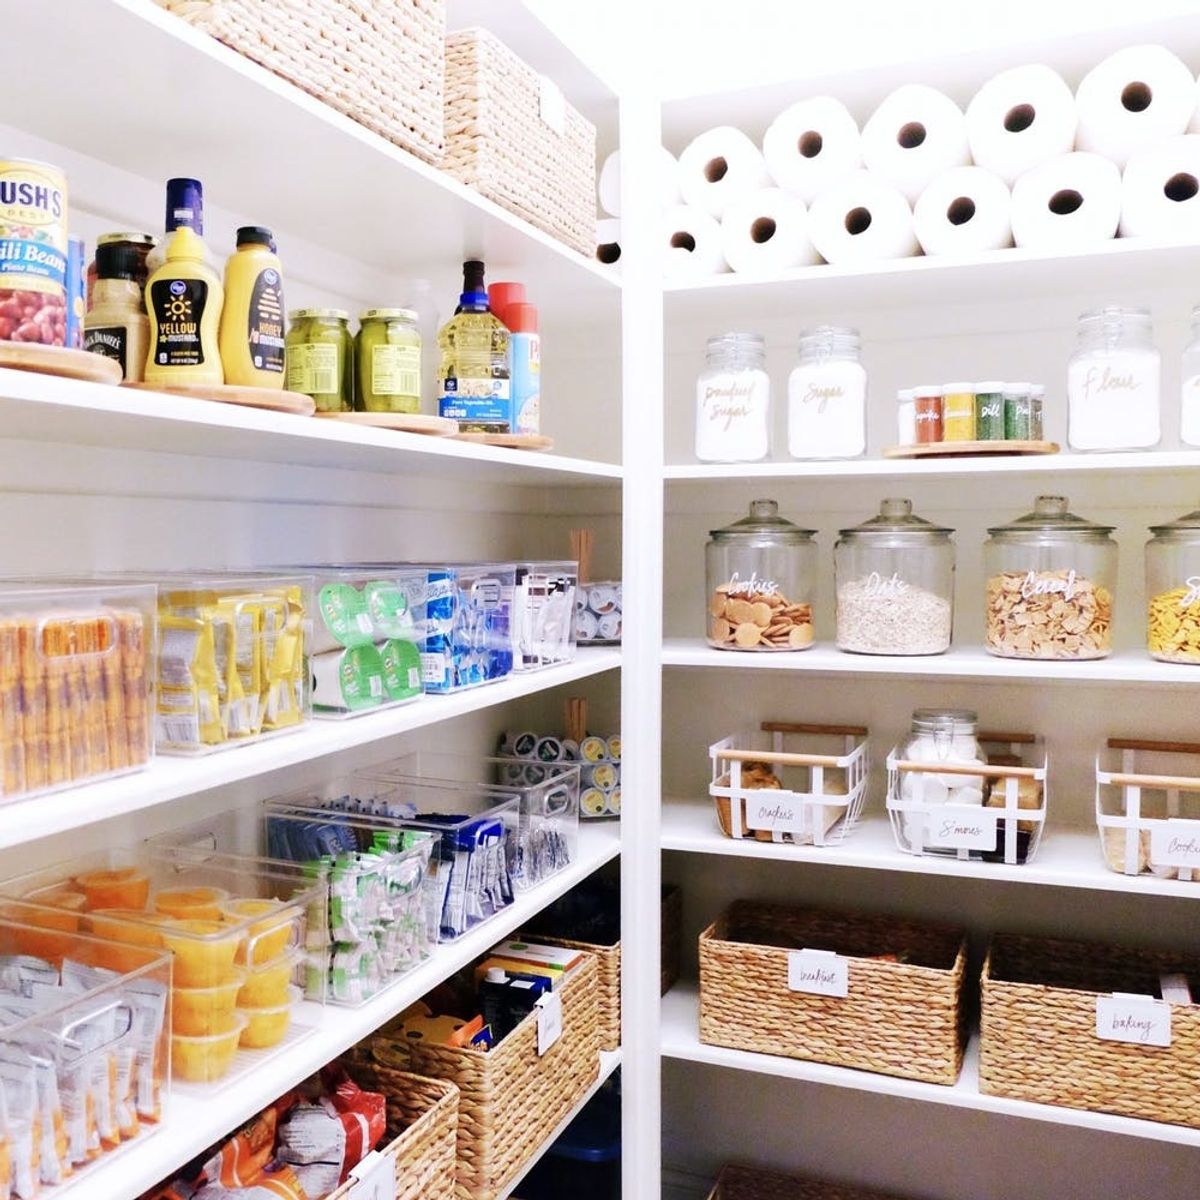 12 Instagram Accounts That’ll Inspire You to Get Organized